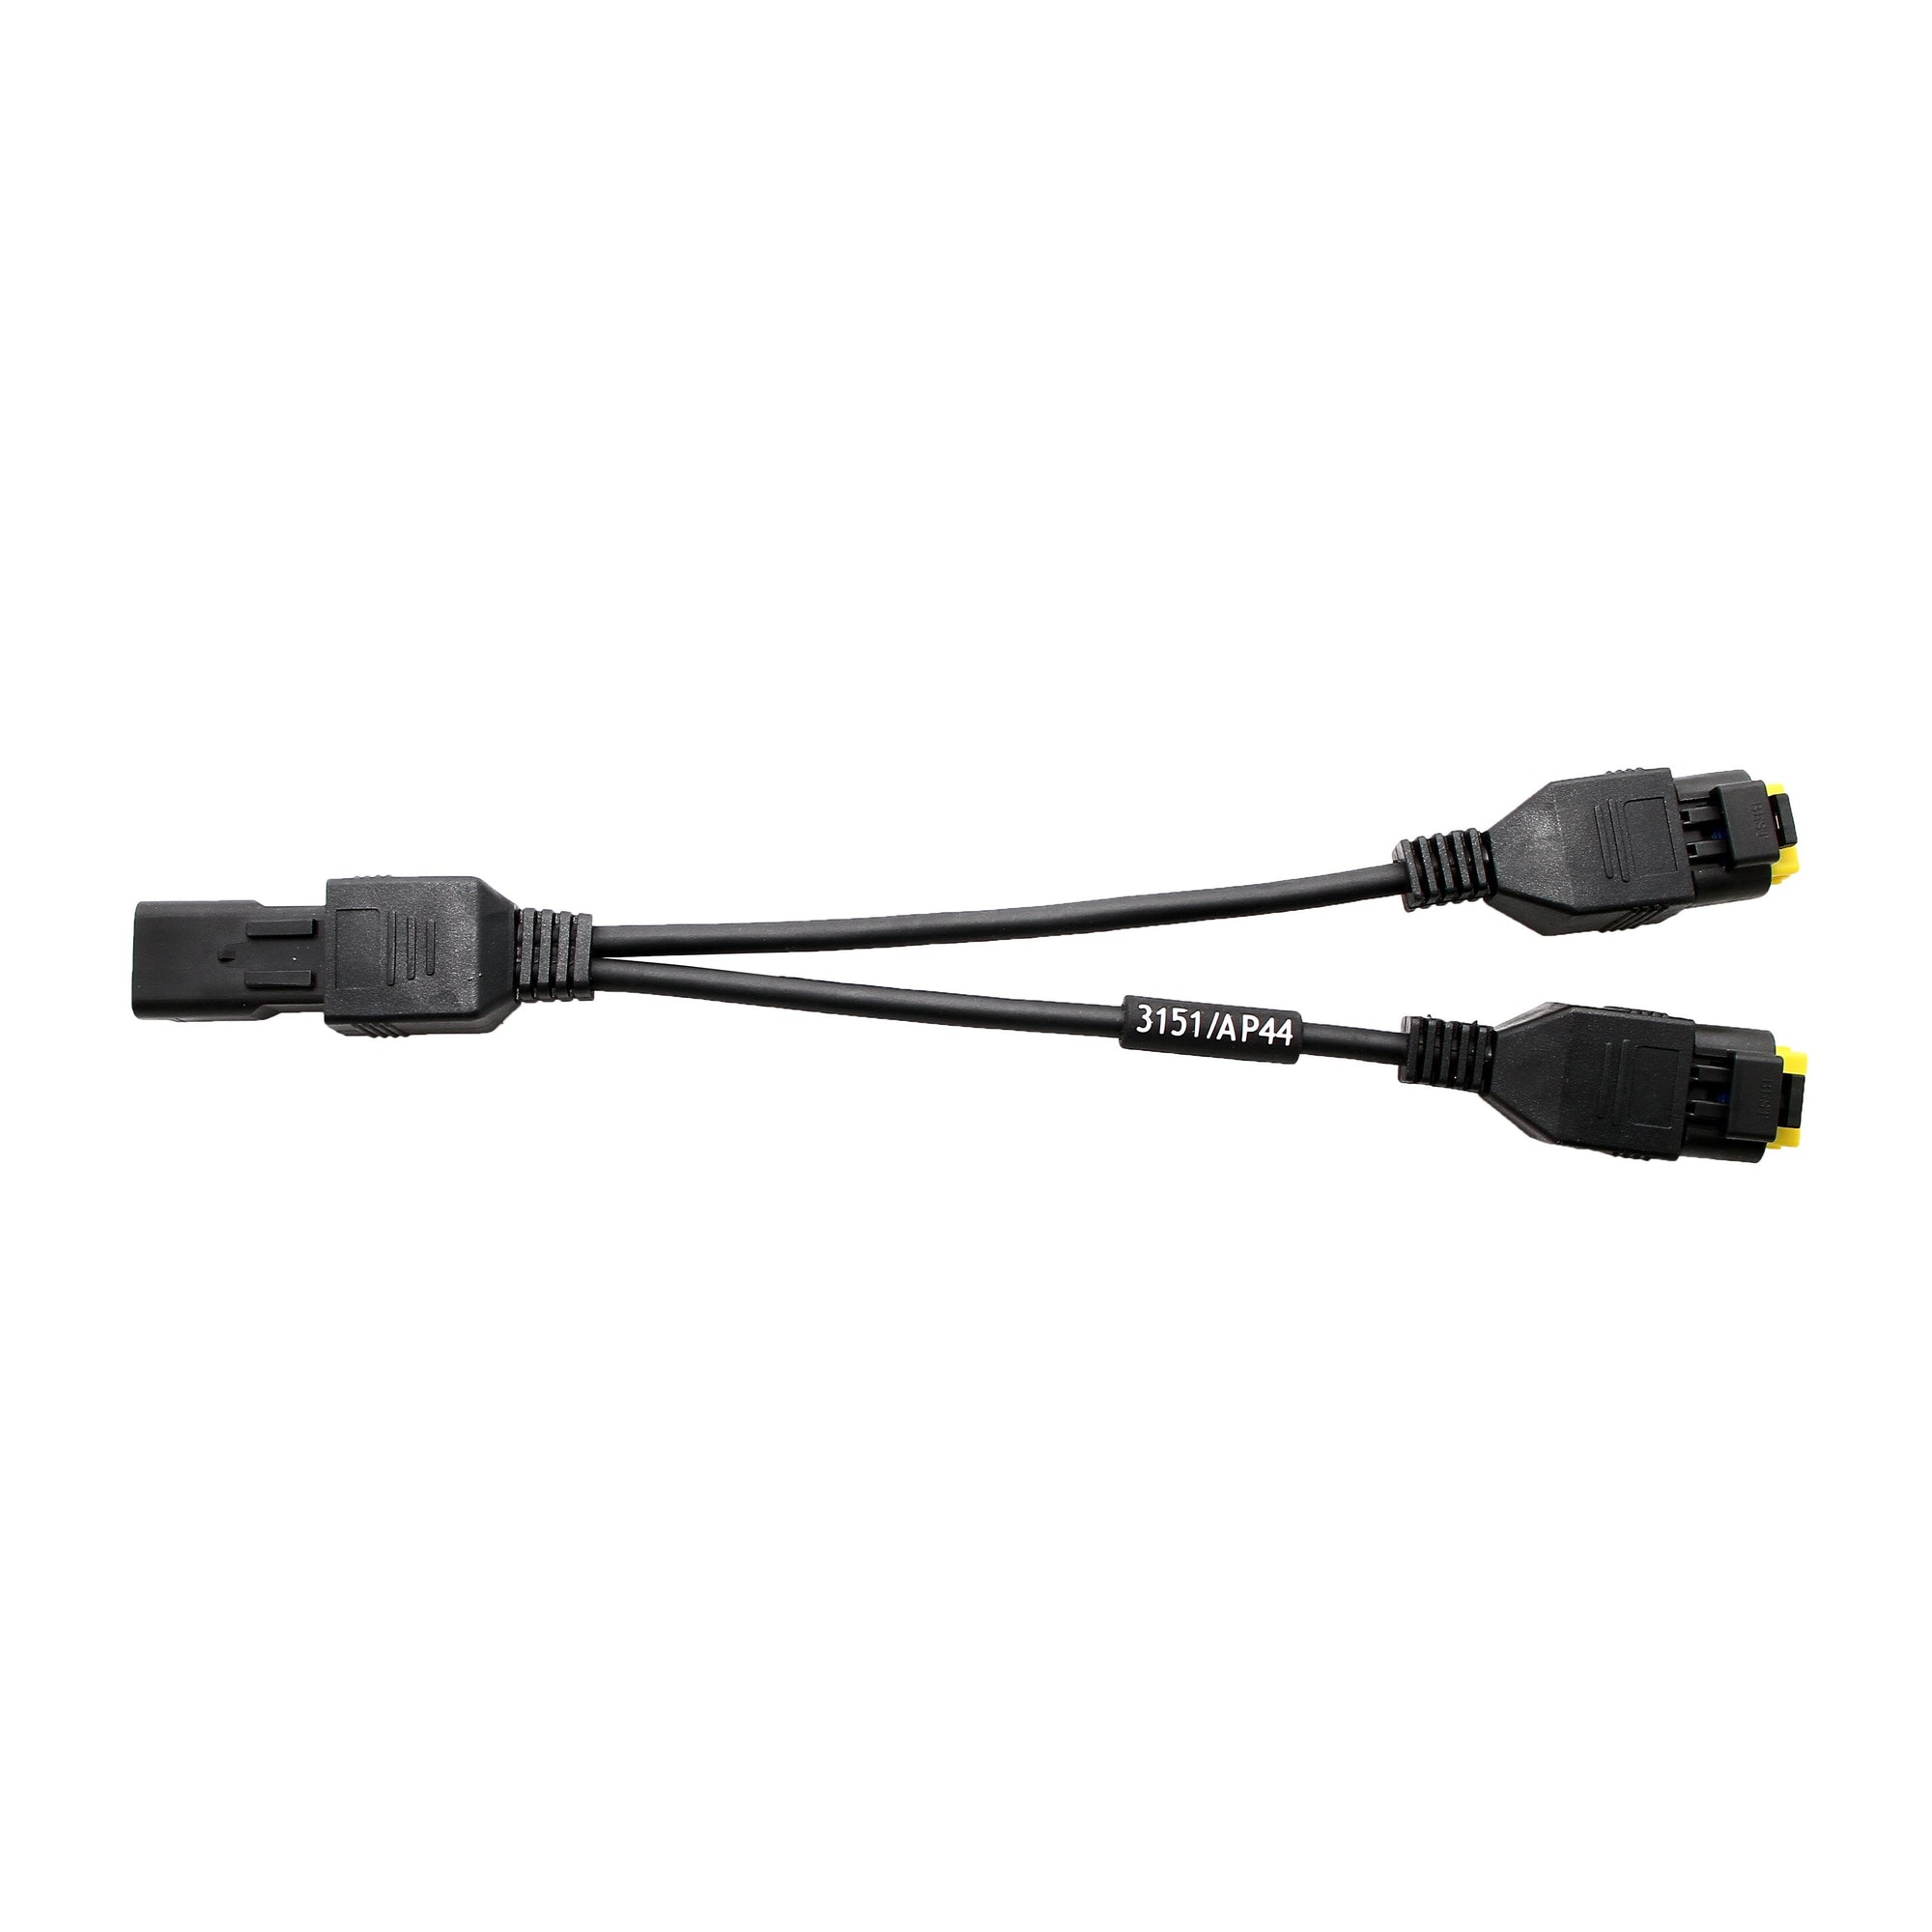 Official Ducati charge maintainer cable for extended diagnose (AP44)